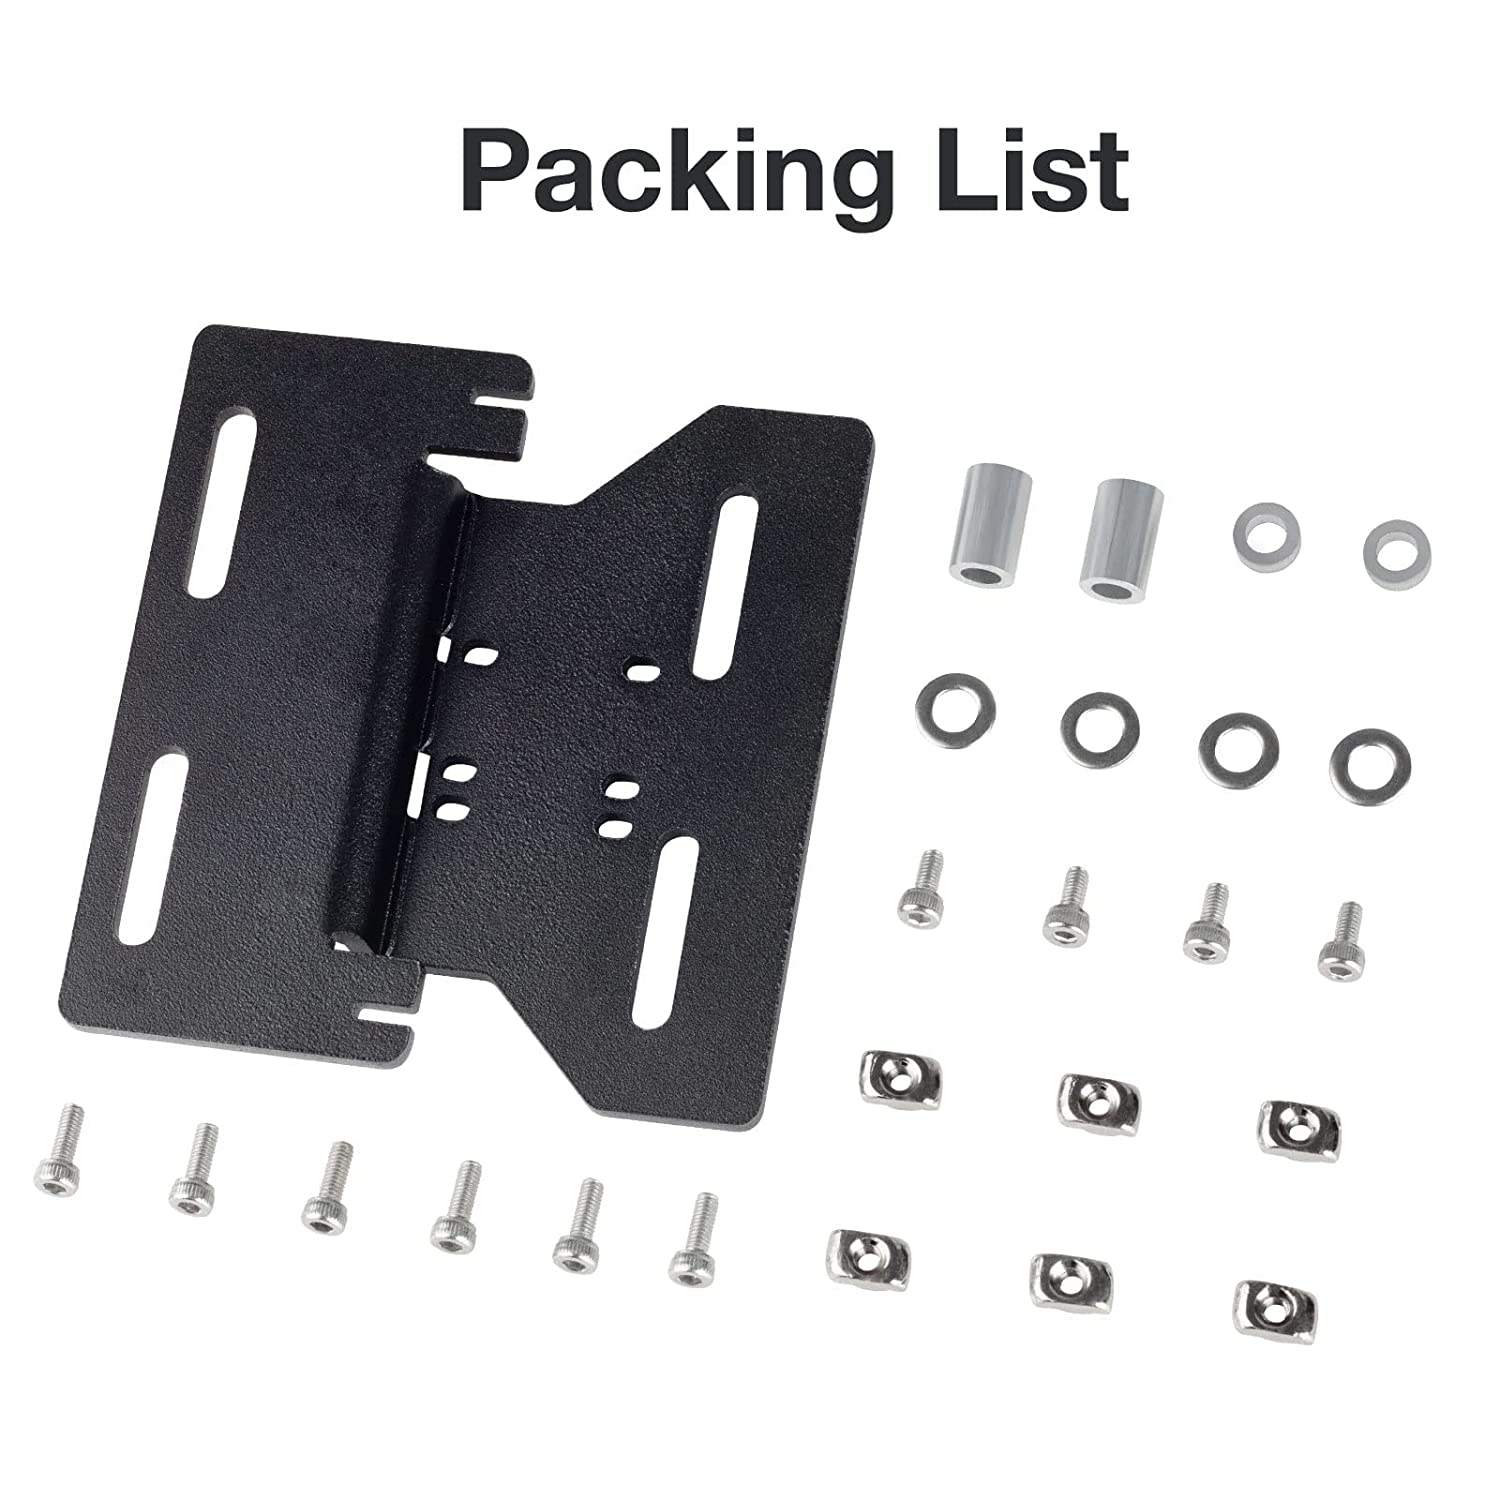 Creality 3D® Linear Rail Y-Axis Mounting Bracket Upgrade Kit for MGN12H/MGN12C Linear Rails - Ender-3 Pro/V2